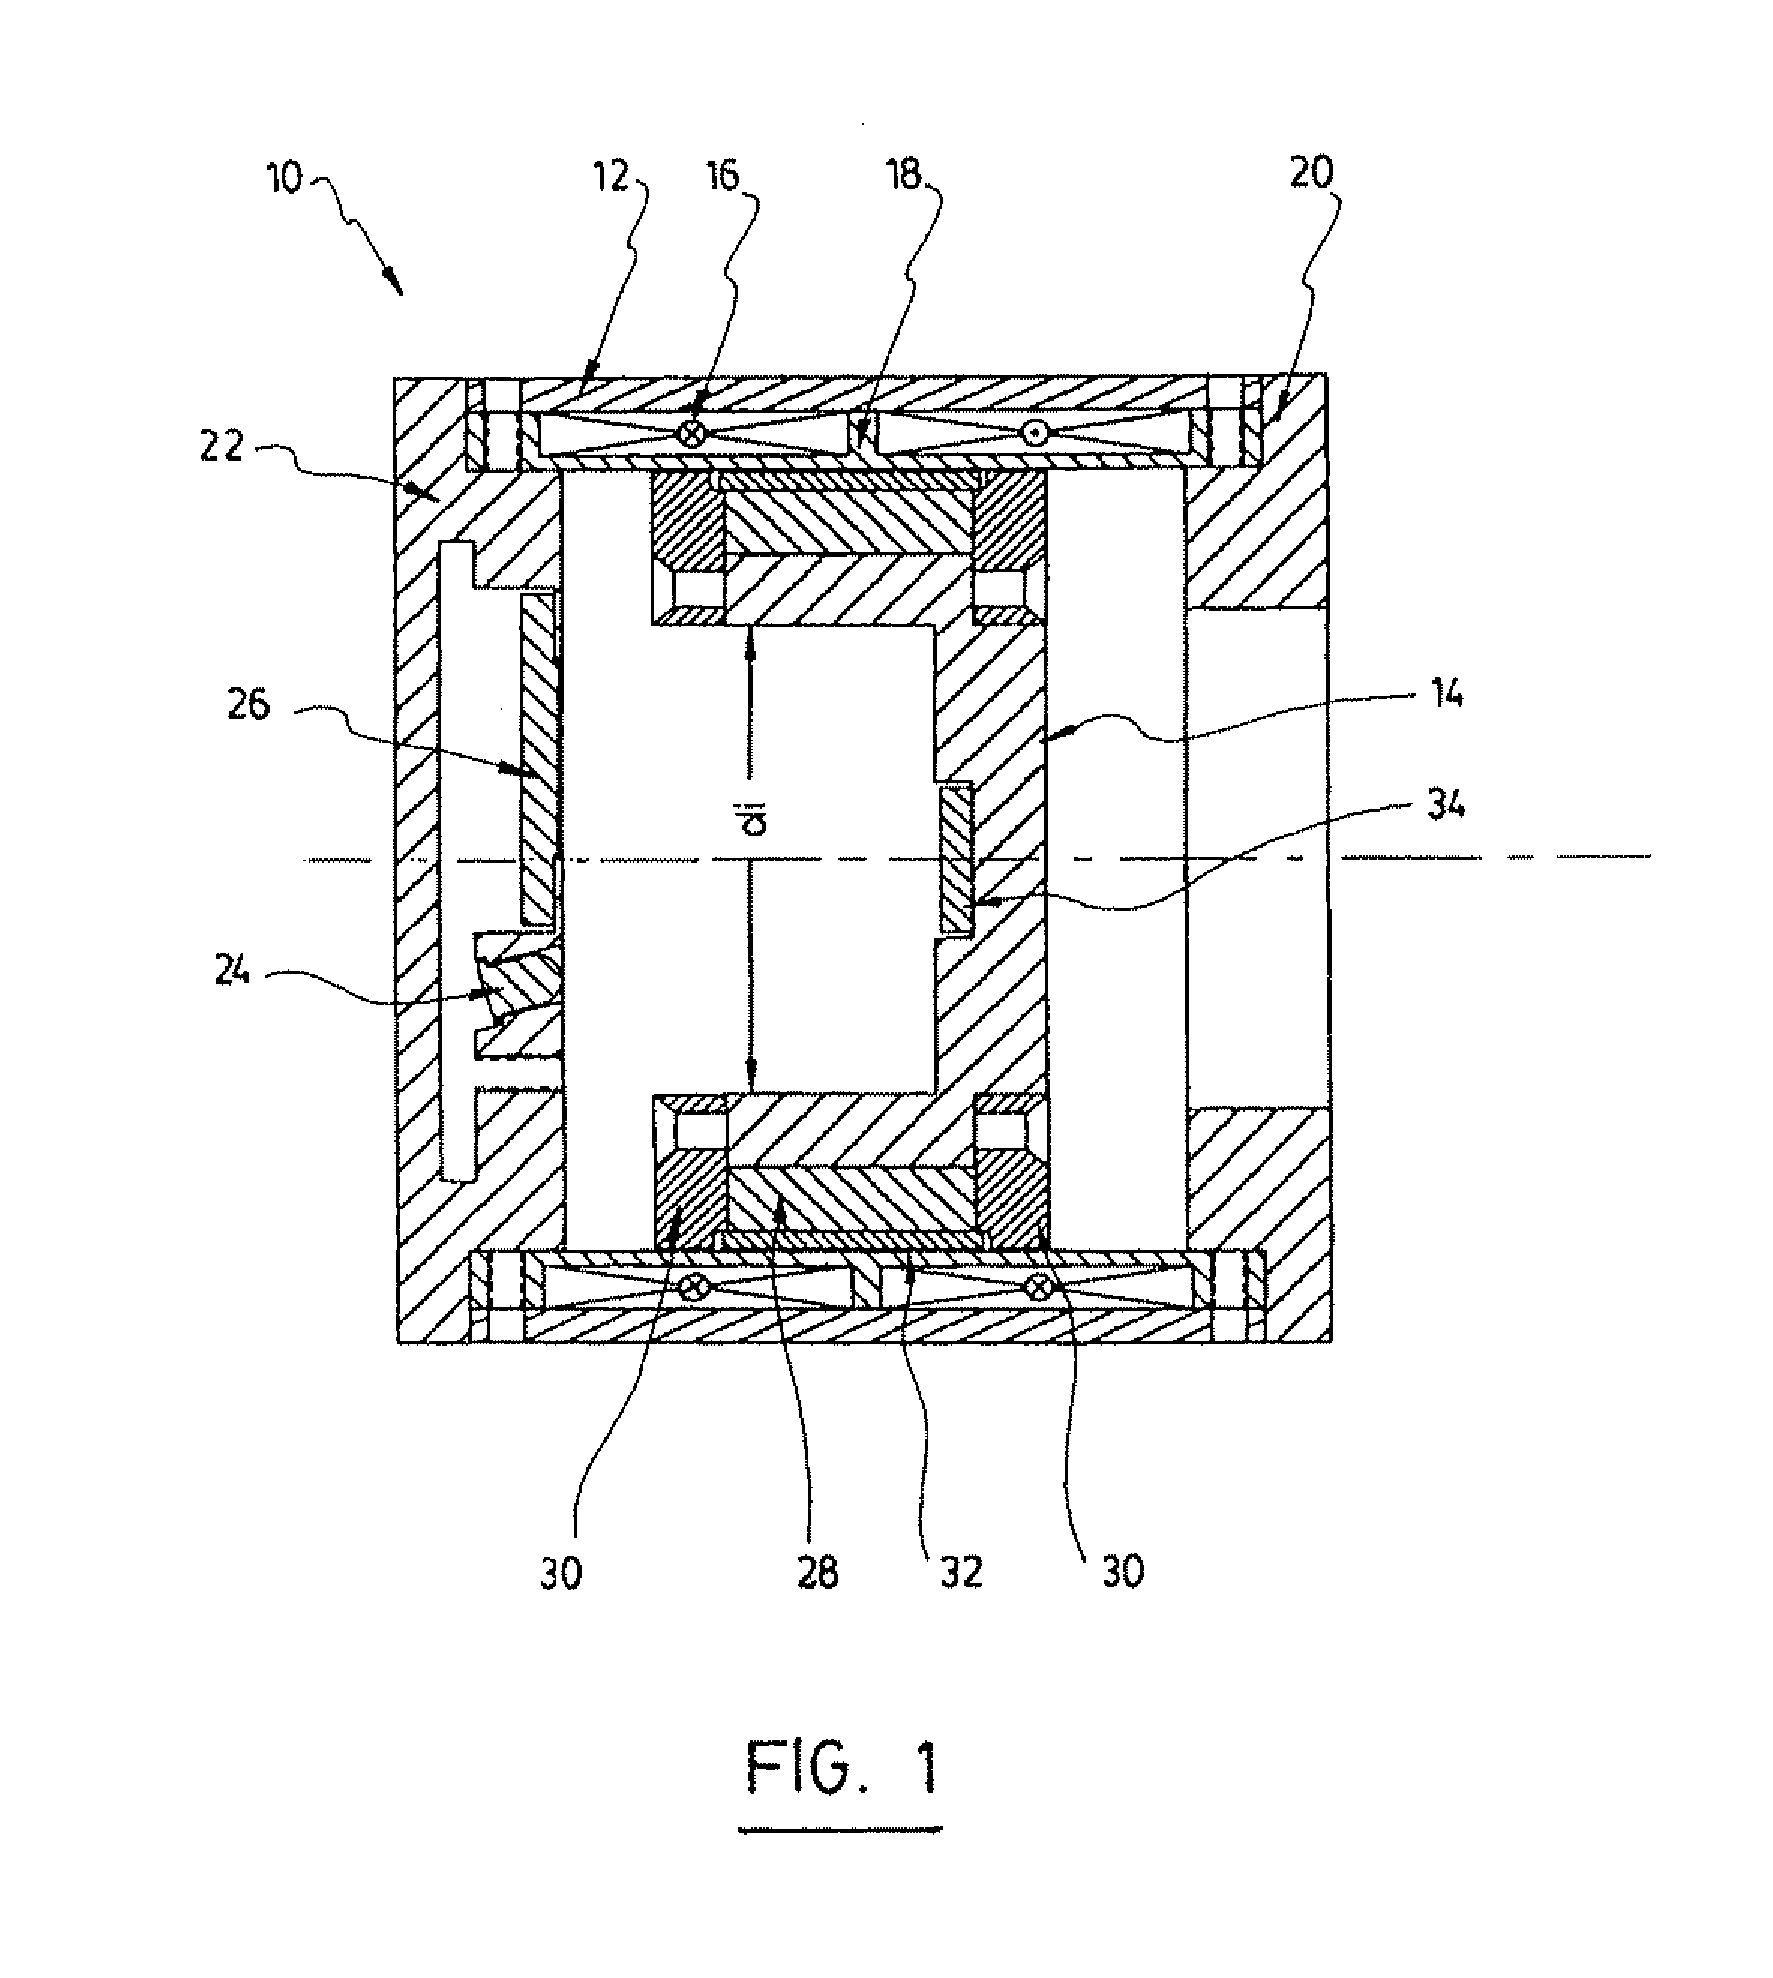 Self-actuated cylinder and oscillation spirometer